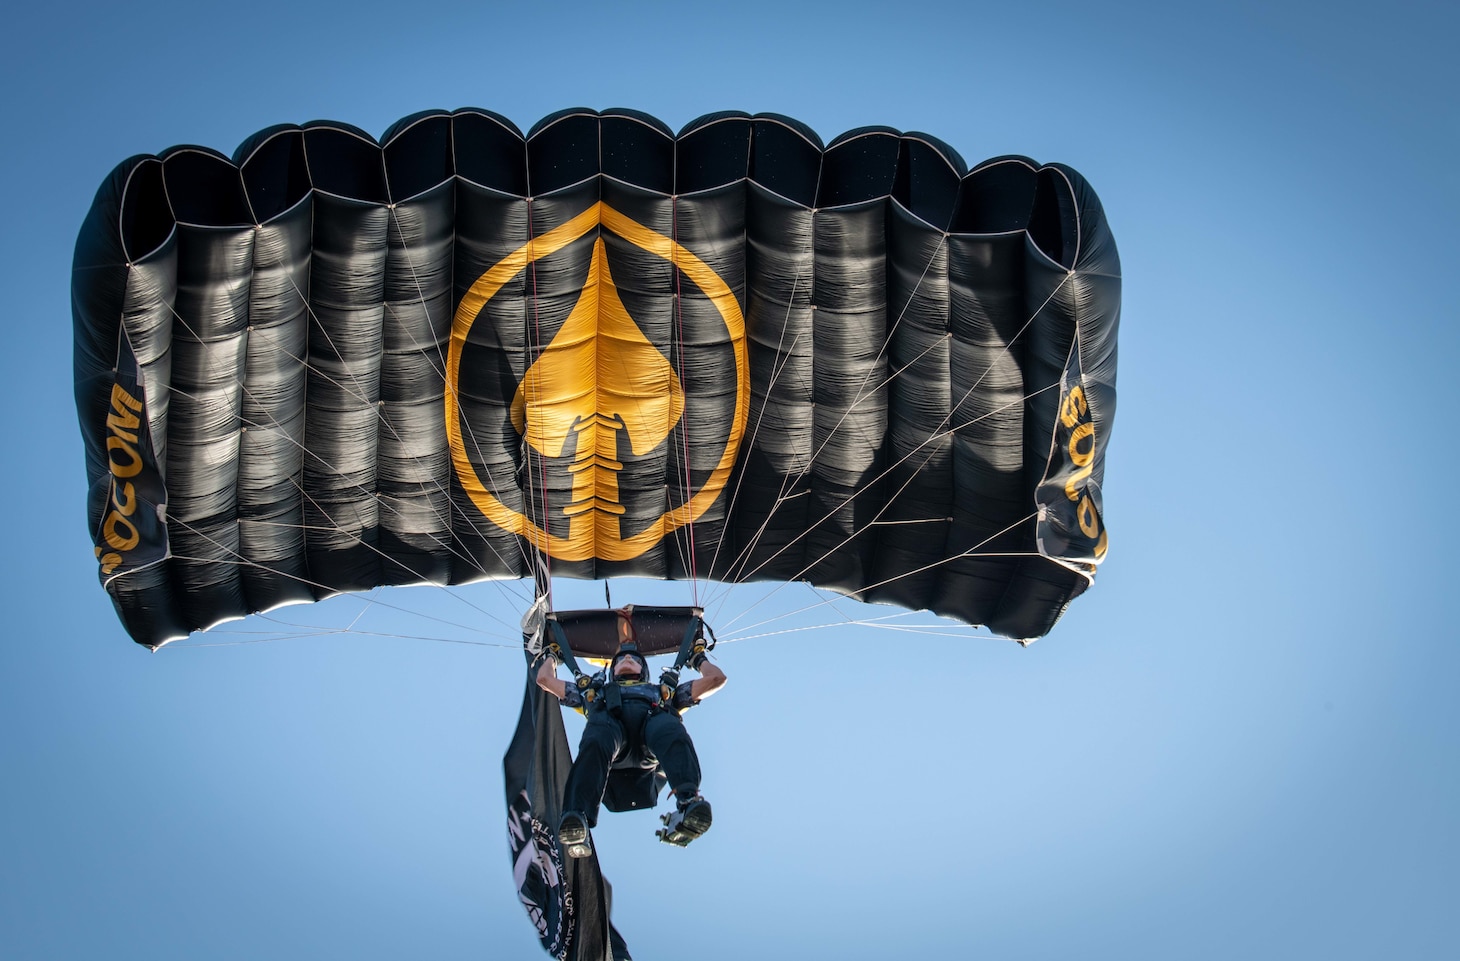 A member of the U.S. Special Operations Command parachute team lands from above at the 2019 DoD Warrior Games cycling time trials in Tampa, Florida.